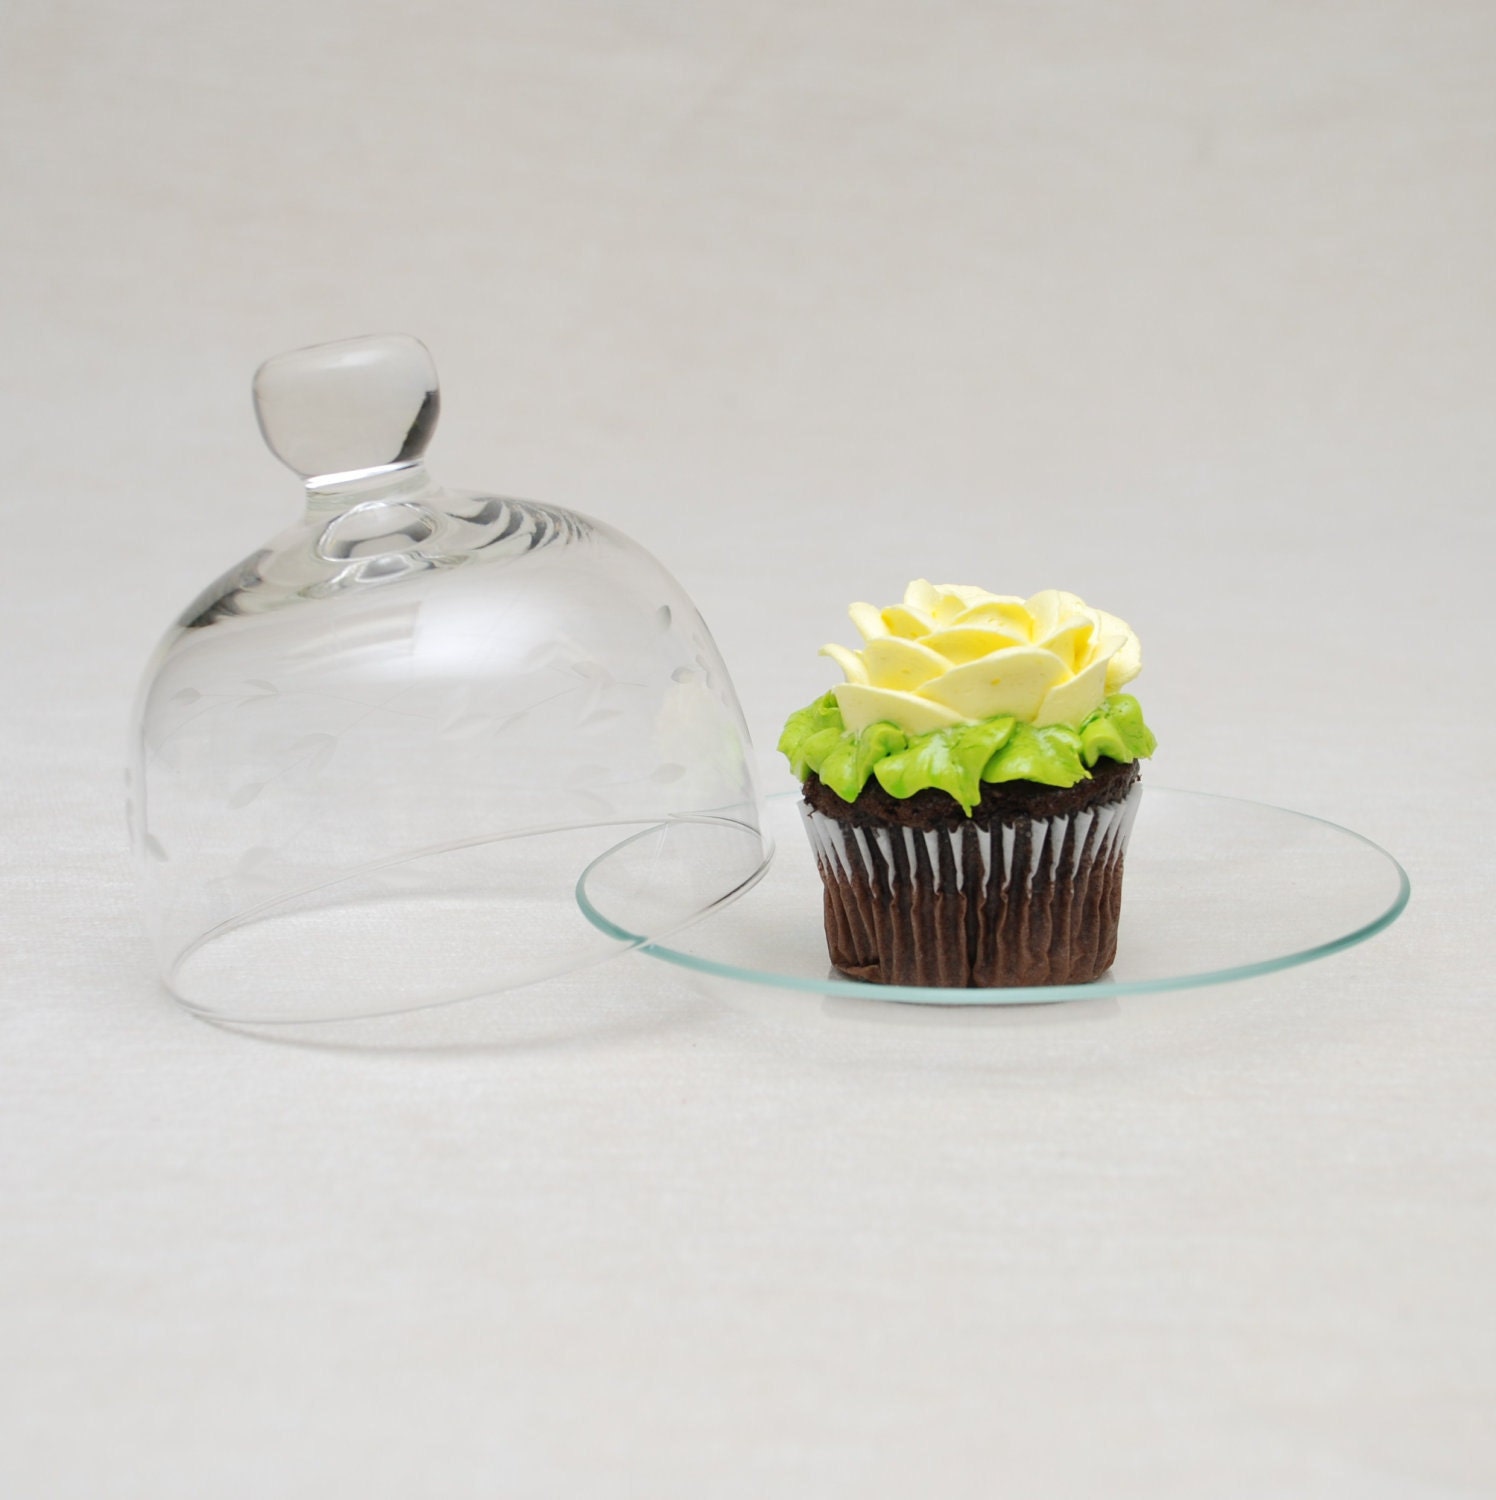 Adorable Cupcake Sized Cake Plate with Glass Dome